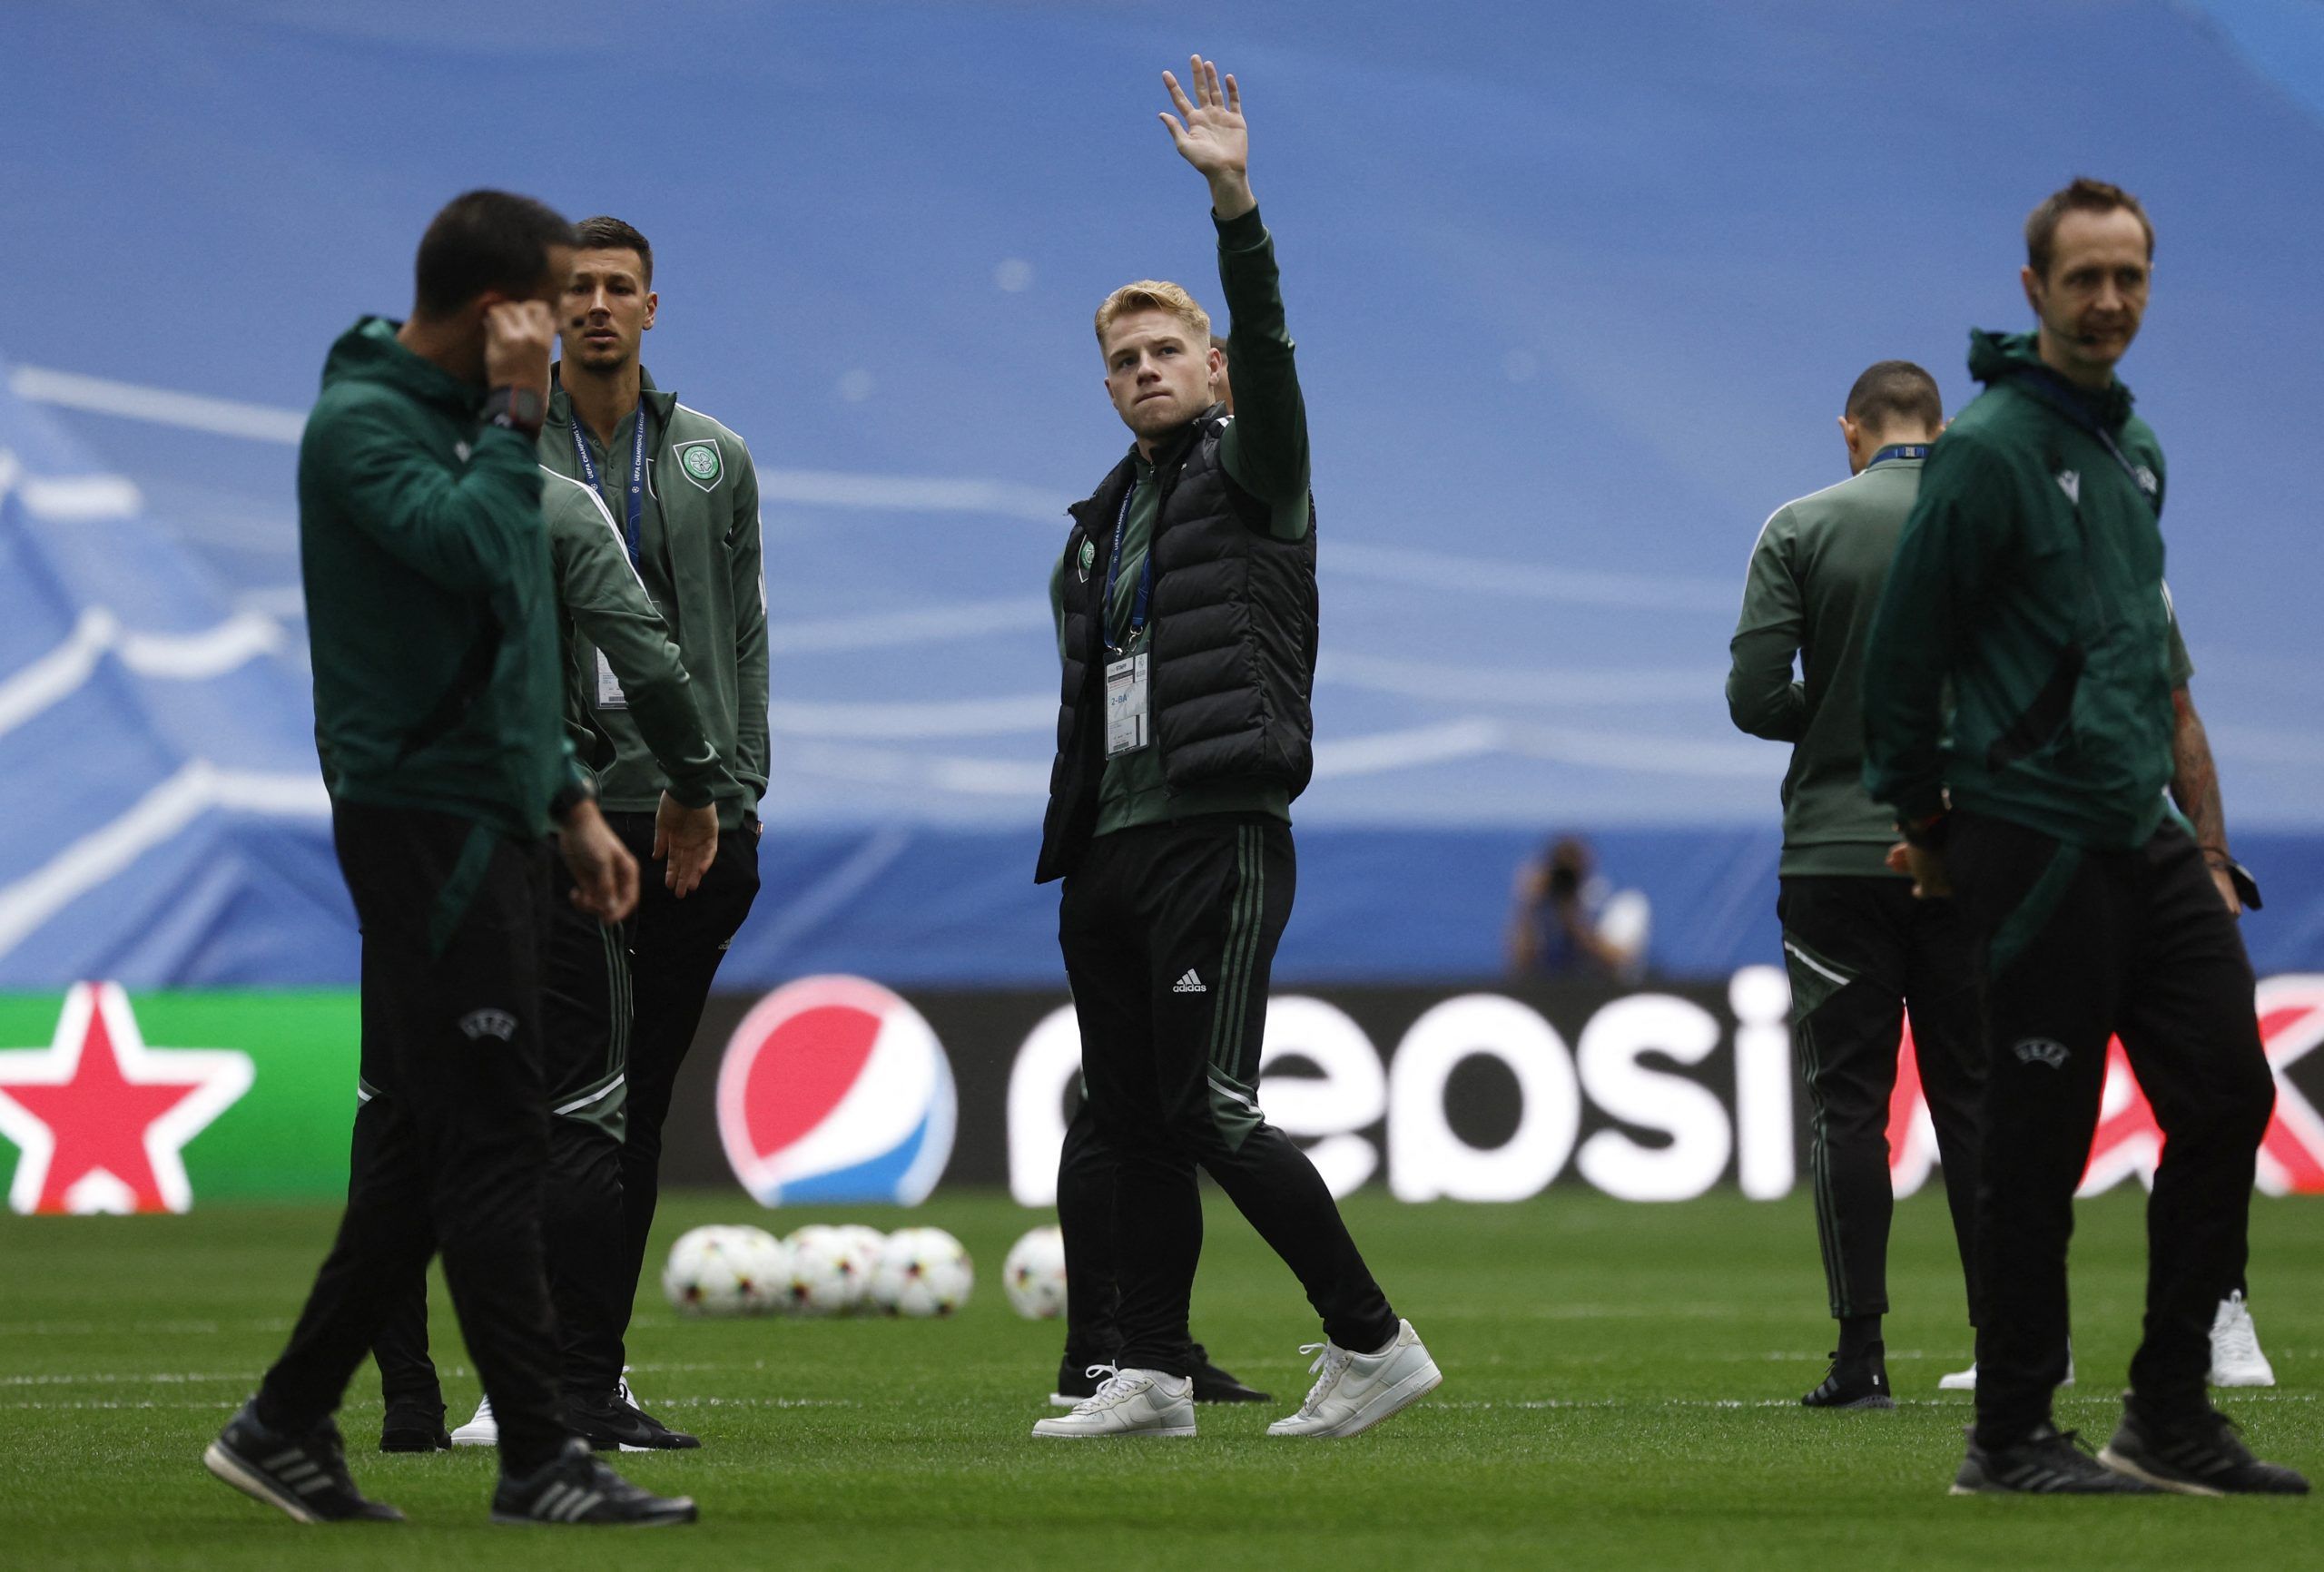 Soccer Football - Champions League - Group F - Real Madrid v Celtic - Santiago Bernabeu, Madrid, Spain - November 2, 2022 Celtic's Stephen Welsh with teammates on the pitch inside the stadium before the match REUTERS/Susana Vera